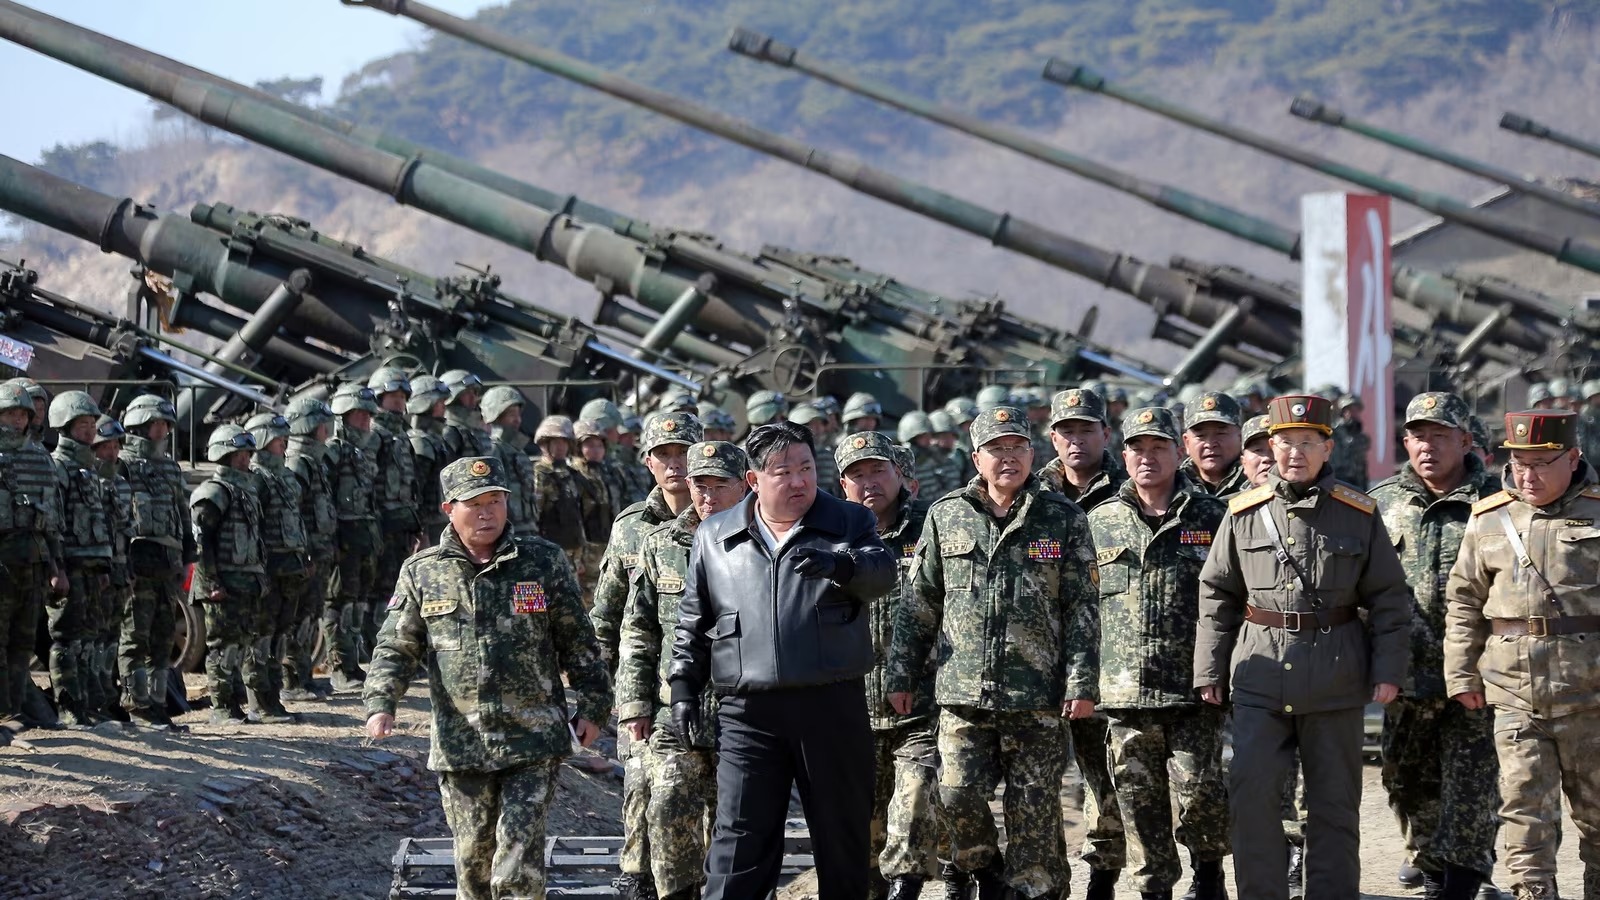 According to KCNA, North Korea’s Kim Jong Un supervises air warfare exercises and encourages readiness for battle